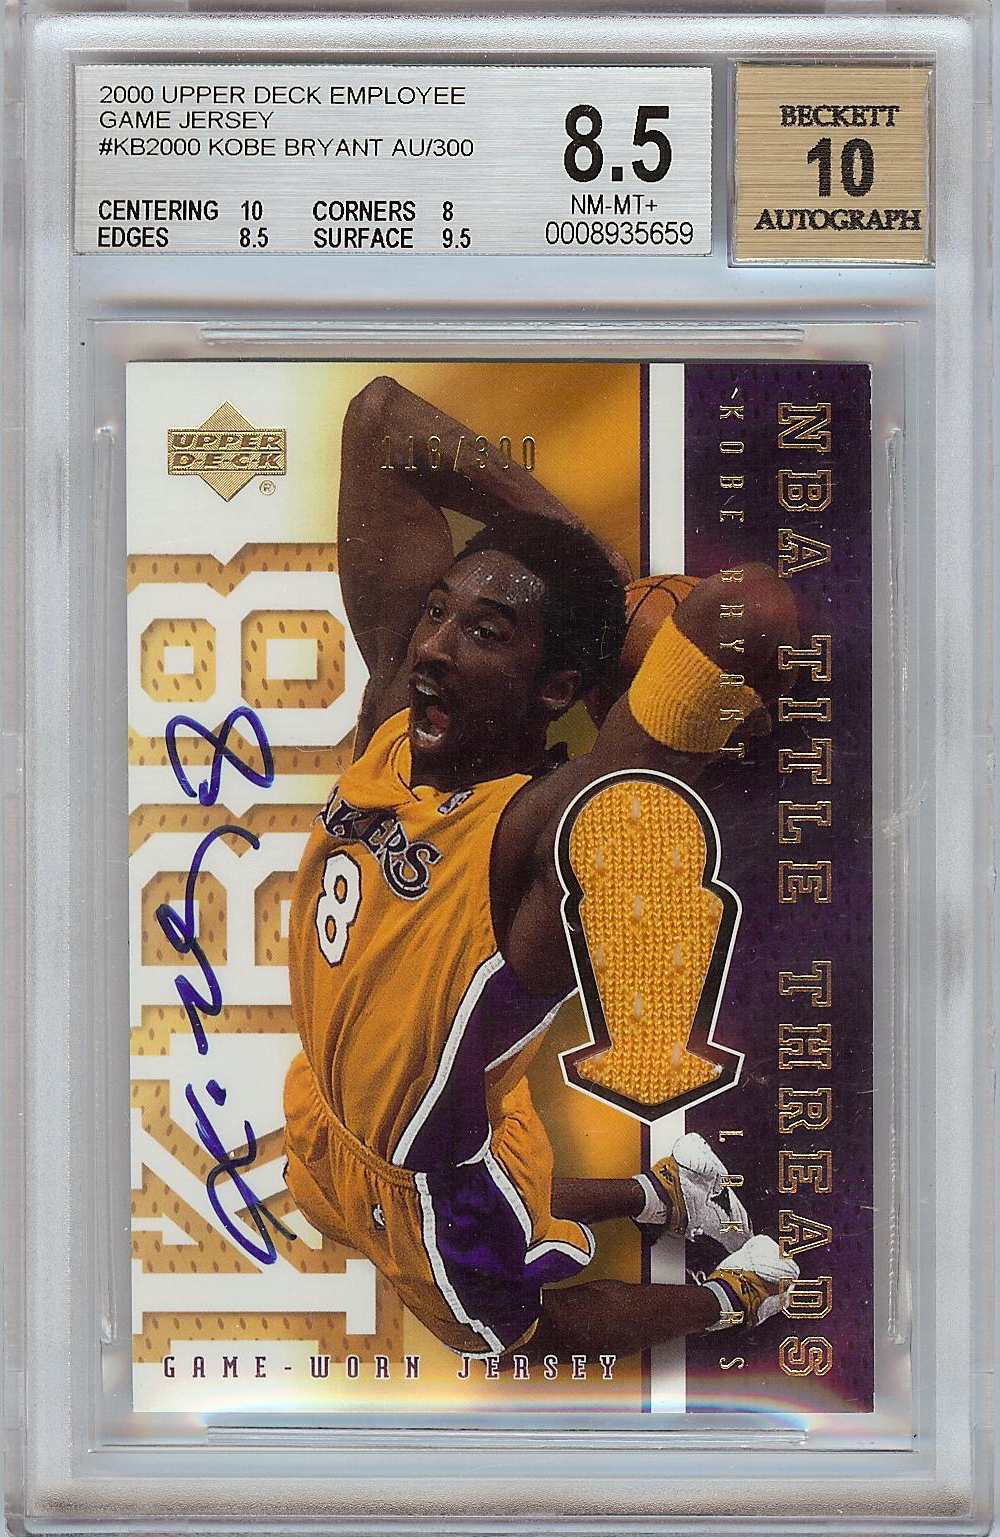 Lot Detail - Kobe Bryant Signed 2000 Upper Deck Employee Issue Signed Jersey  (118/300) BGS 8.5 (AUTO 10)